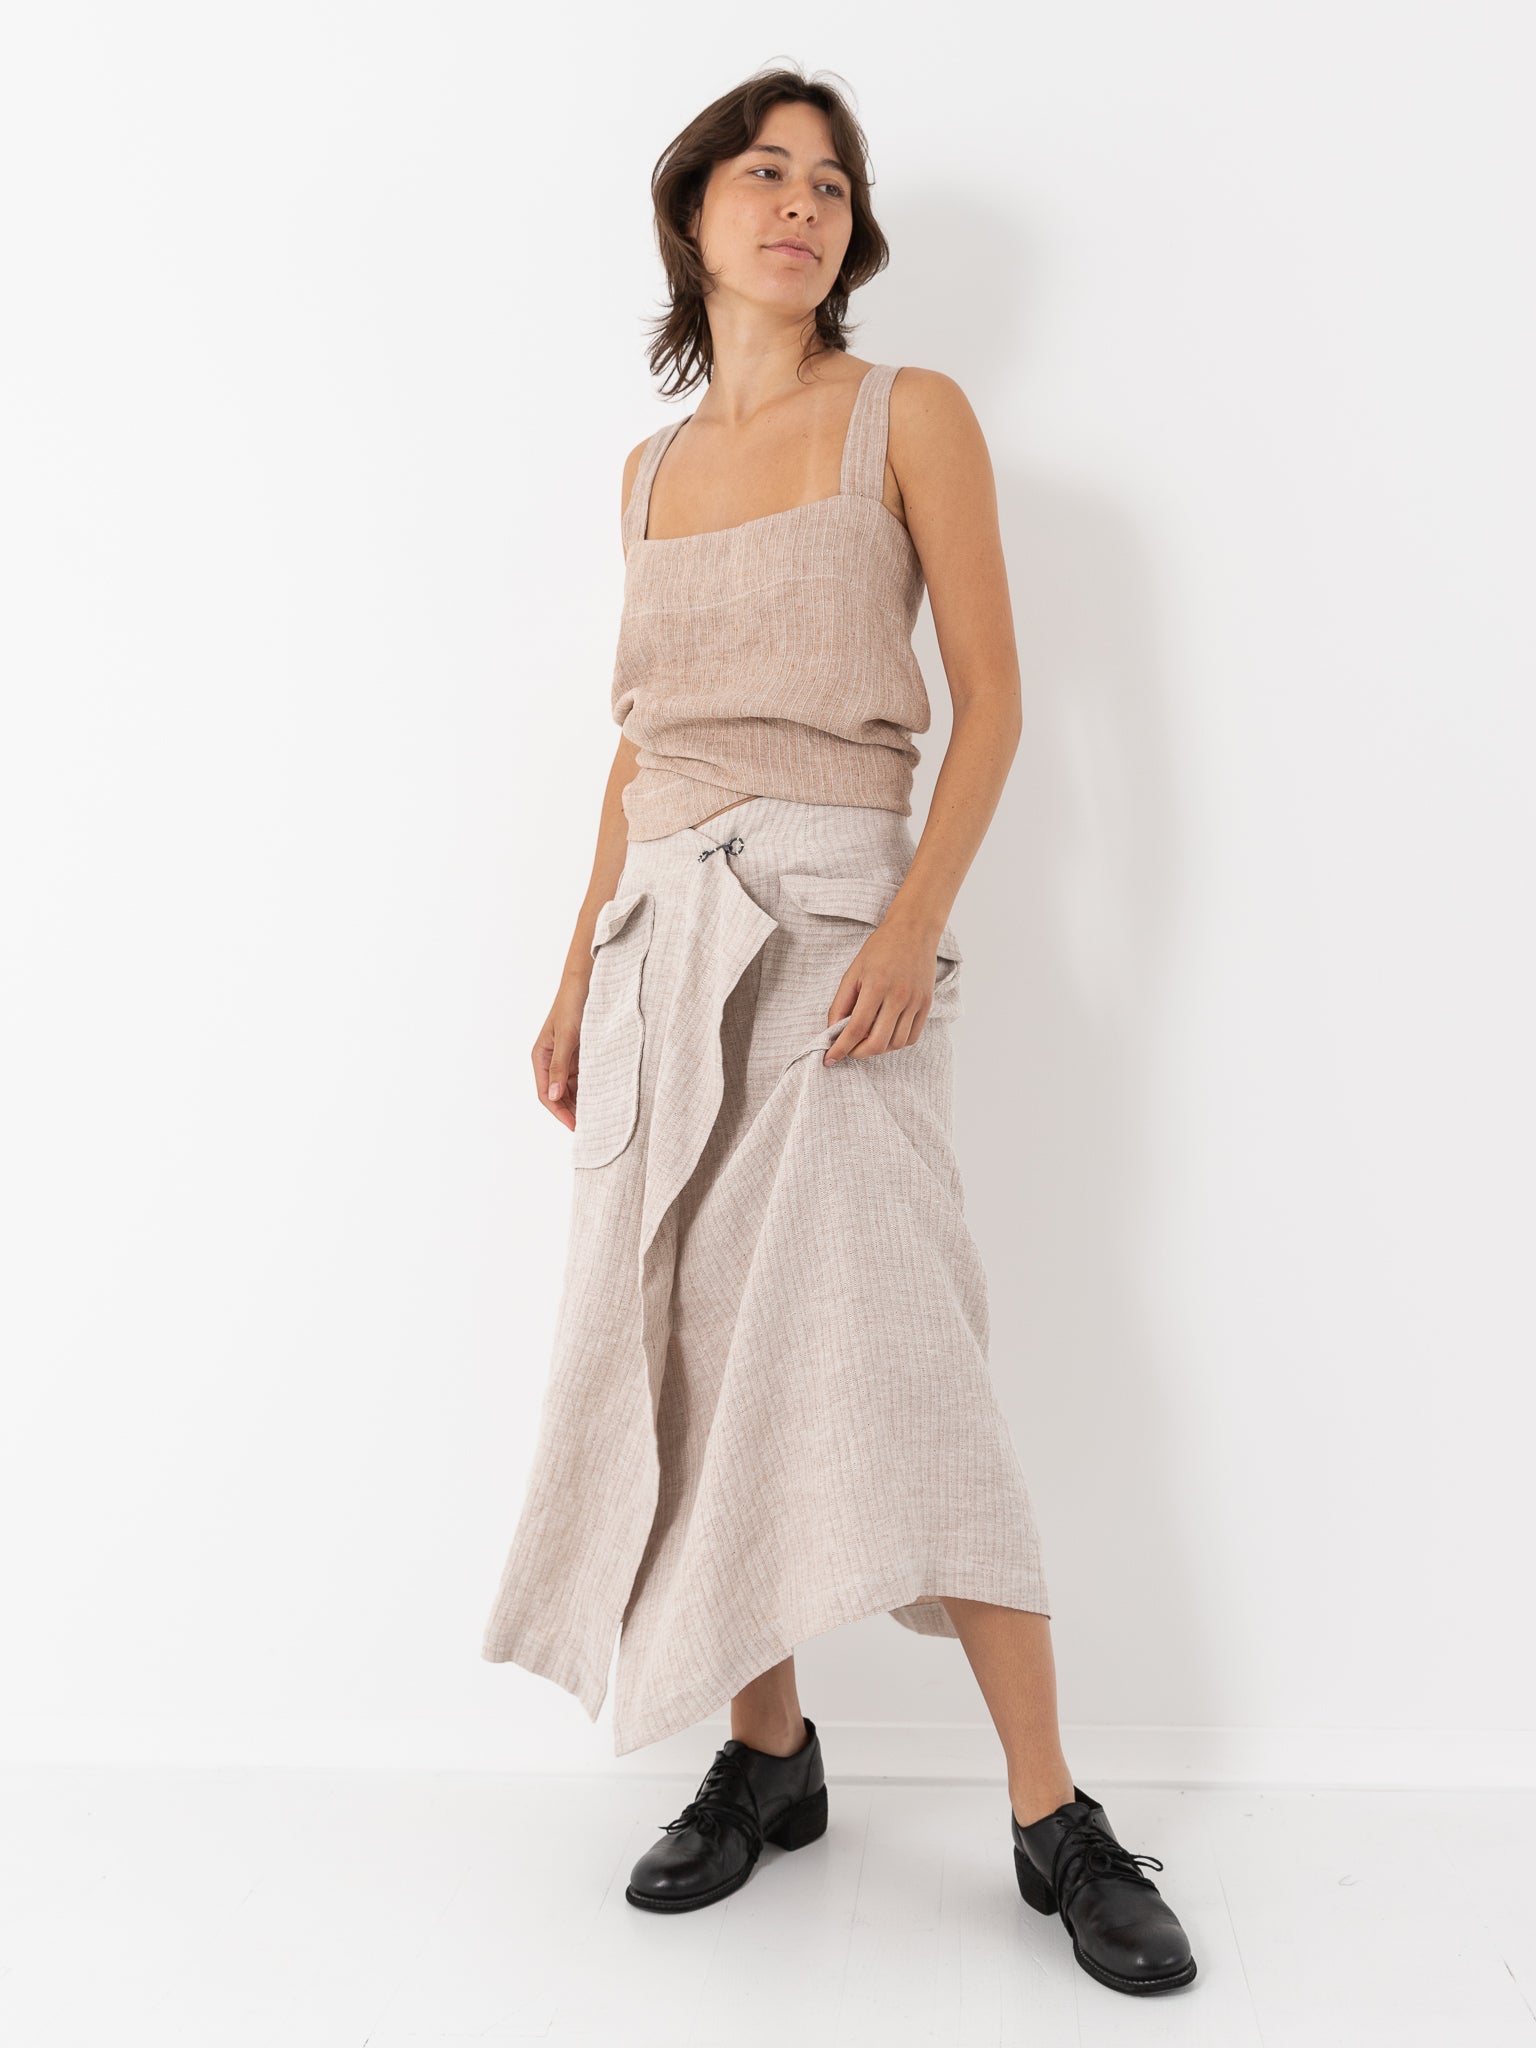 Atelier Suppan Round Hook Skirt, Natural - Worthwhile